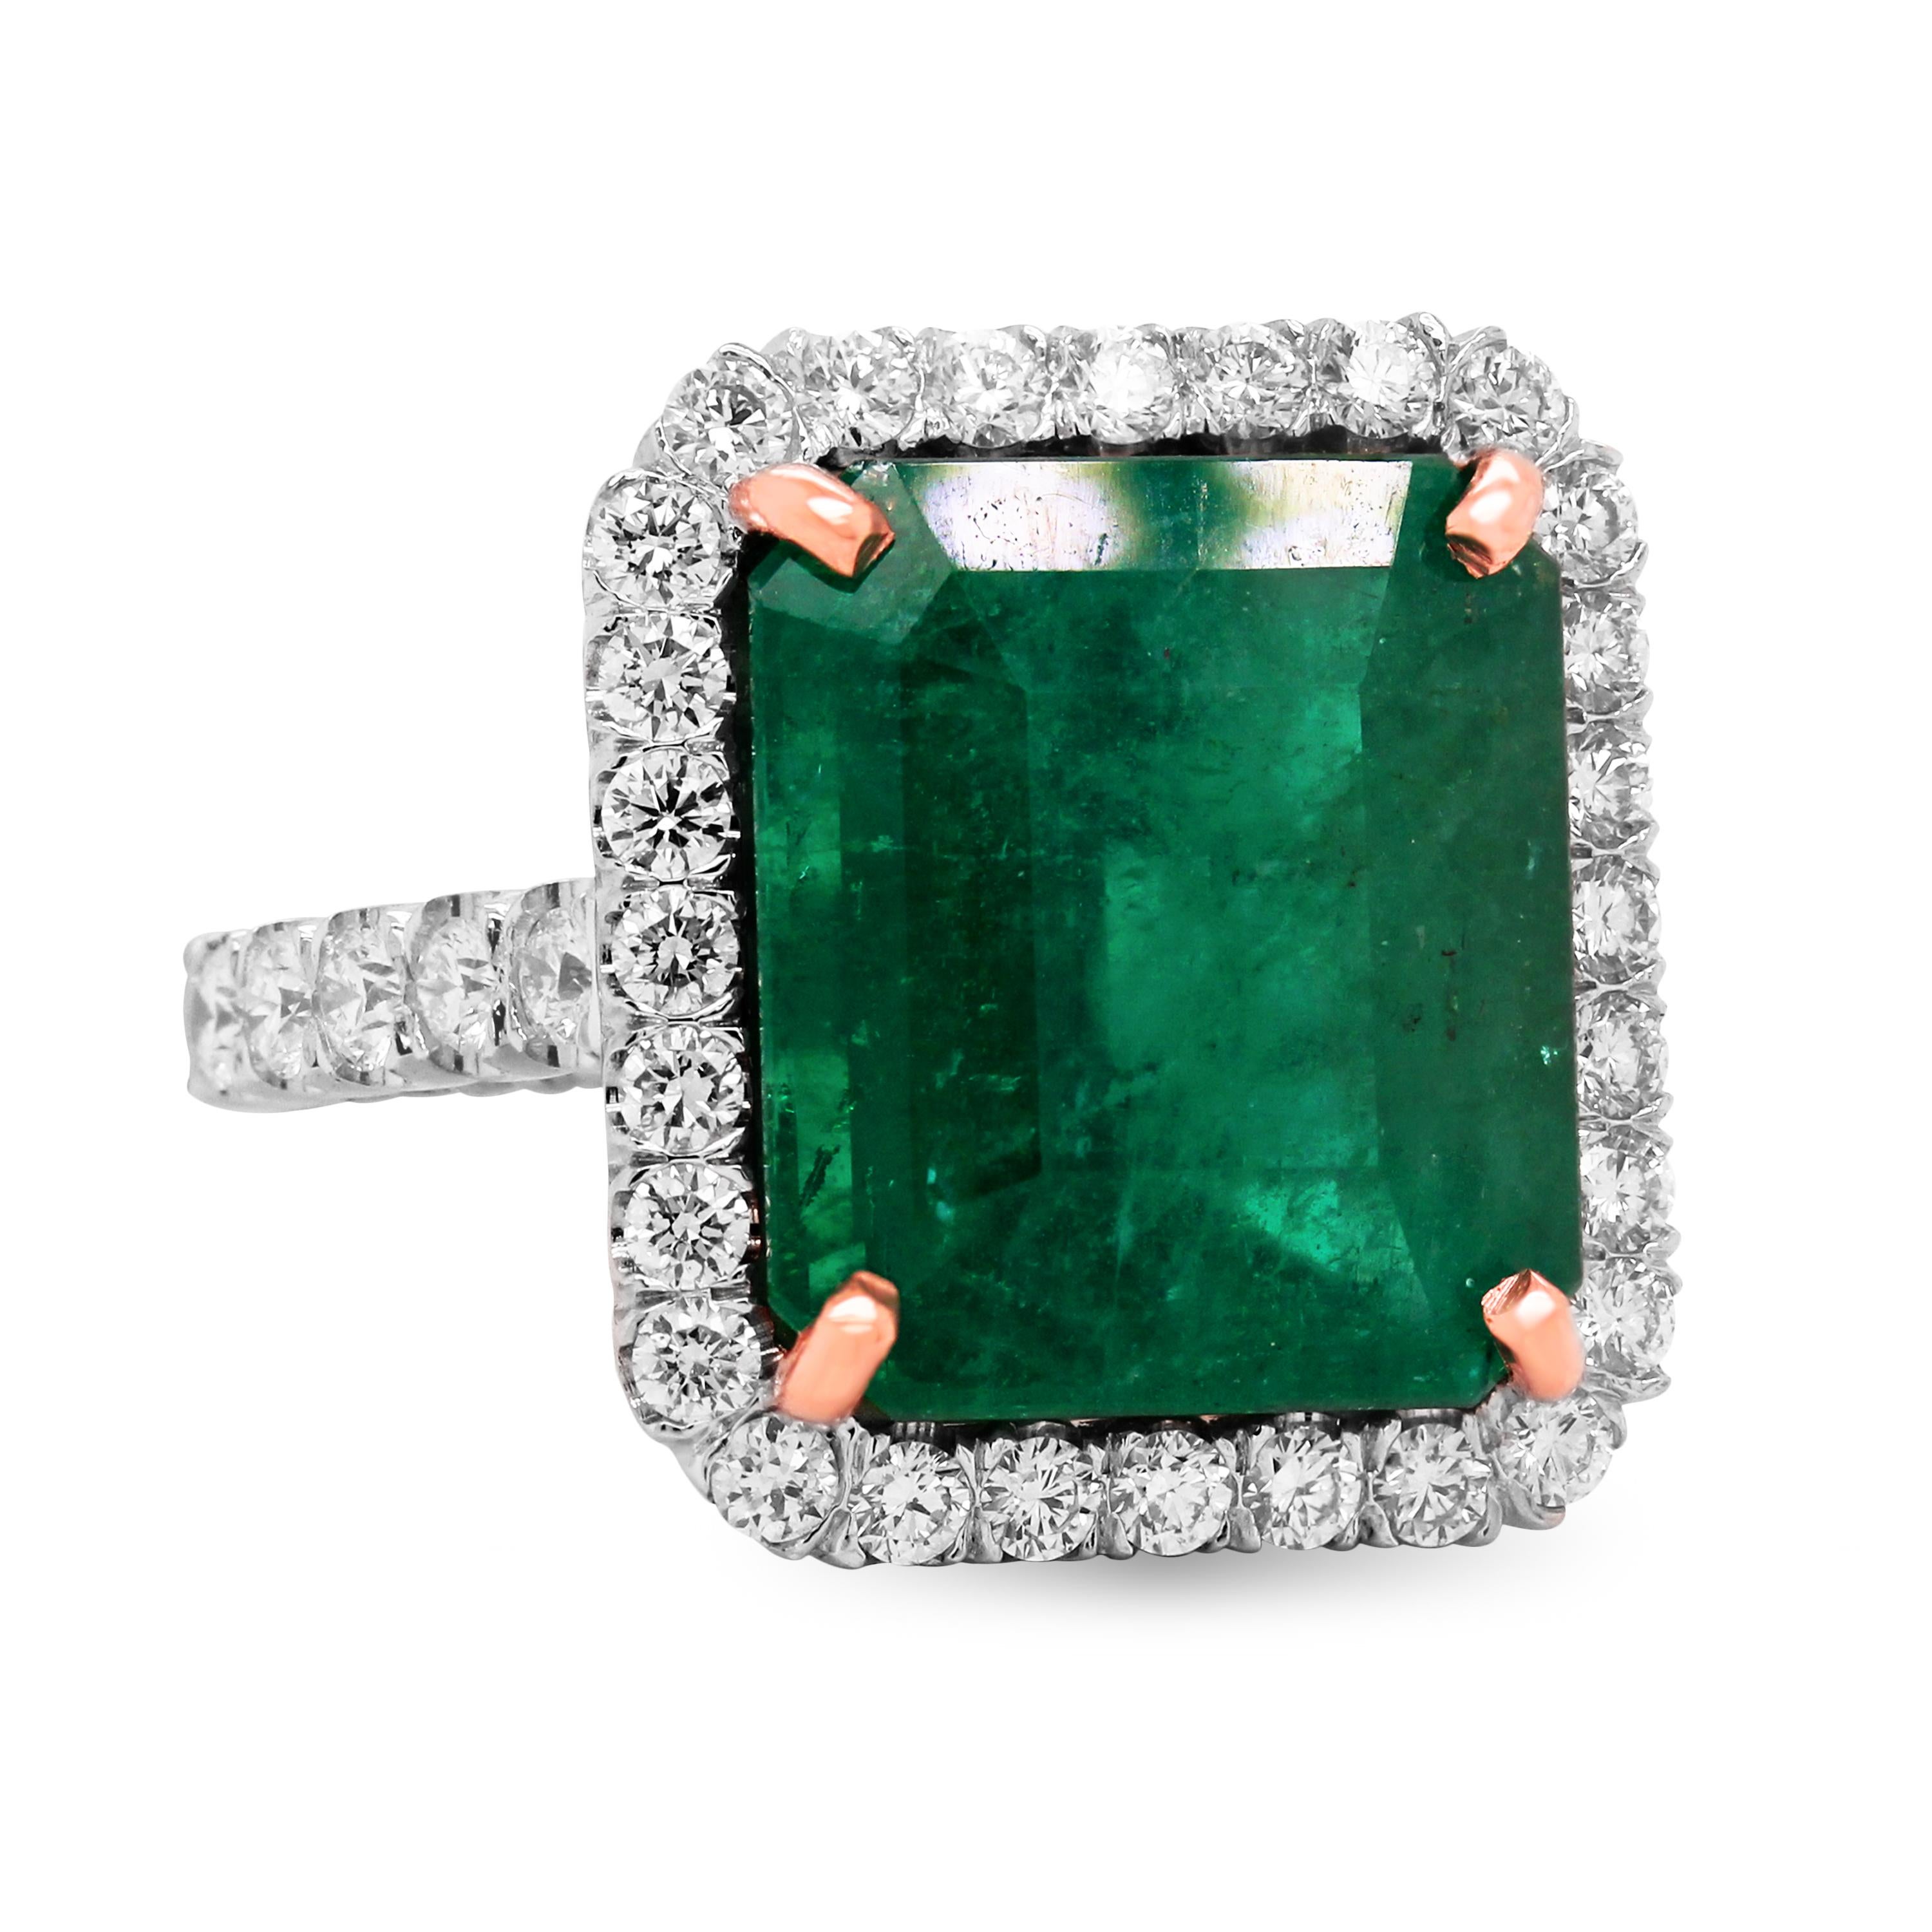 14 Karat White Rose Gold Diamond 8.90 Carat Colombian Emerald Cocktail Ring

This fine Colombian Emerald center weighs 8.90 carats. This natural Emerald has incredible color with the deep and vibrant greens.

1.13 carat diamonds total weight

Ring